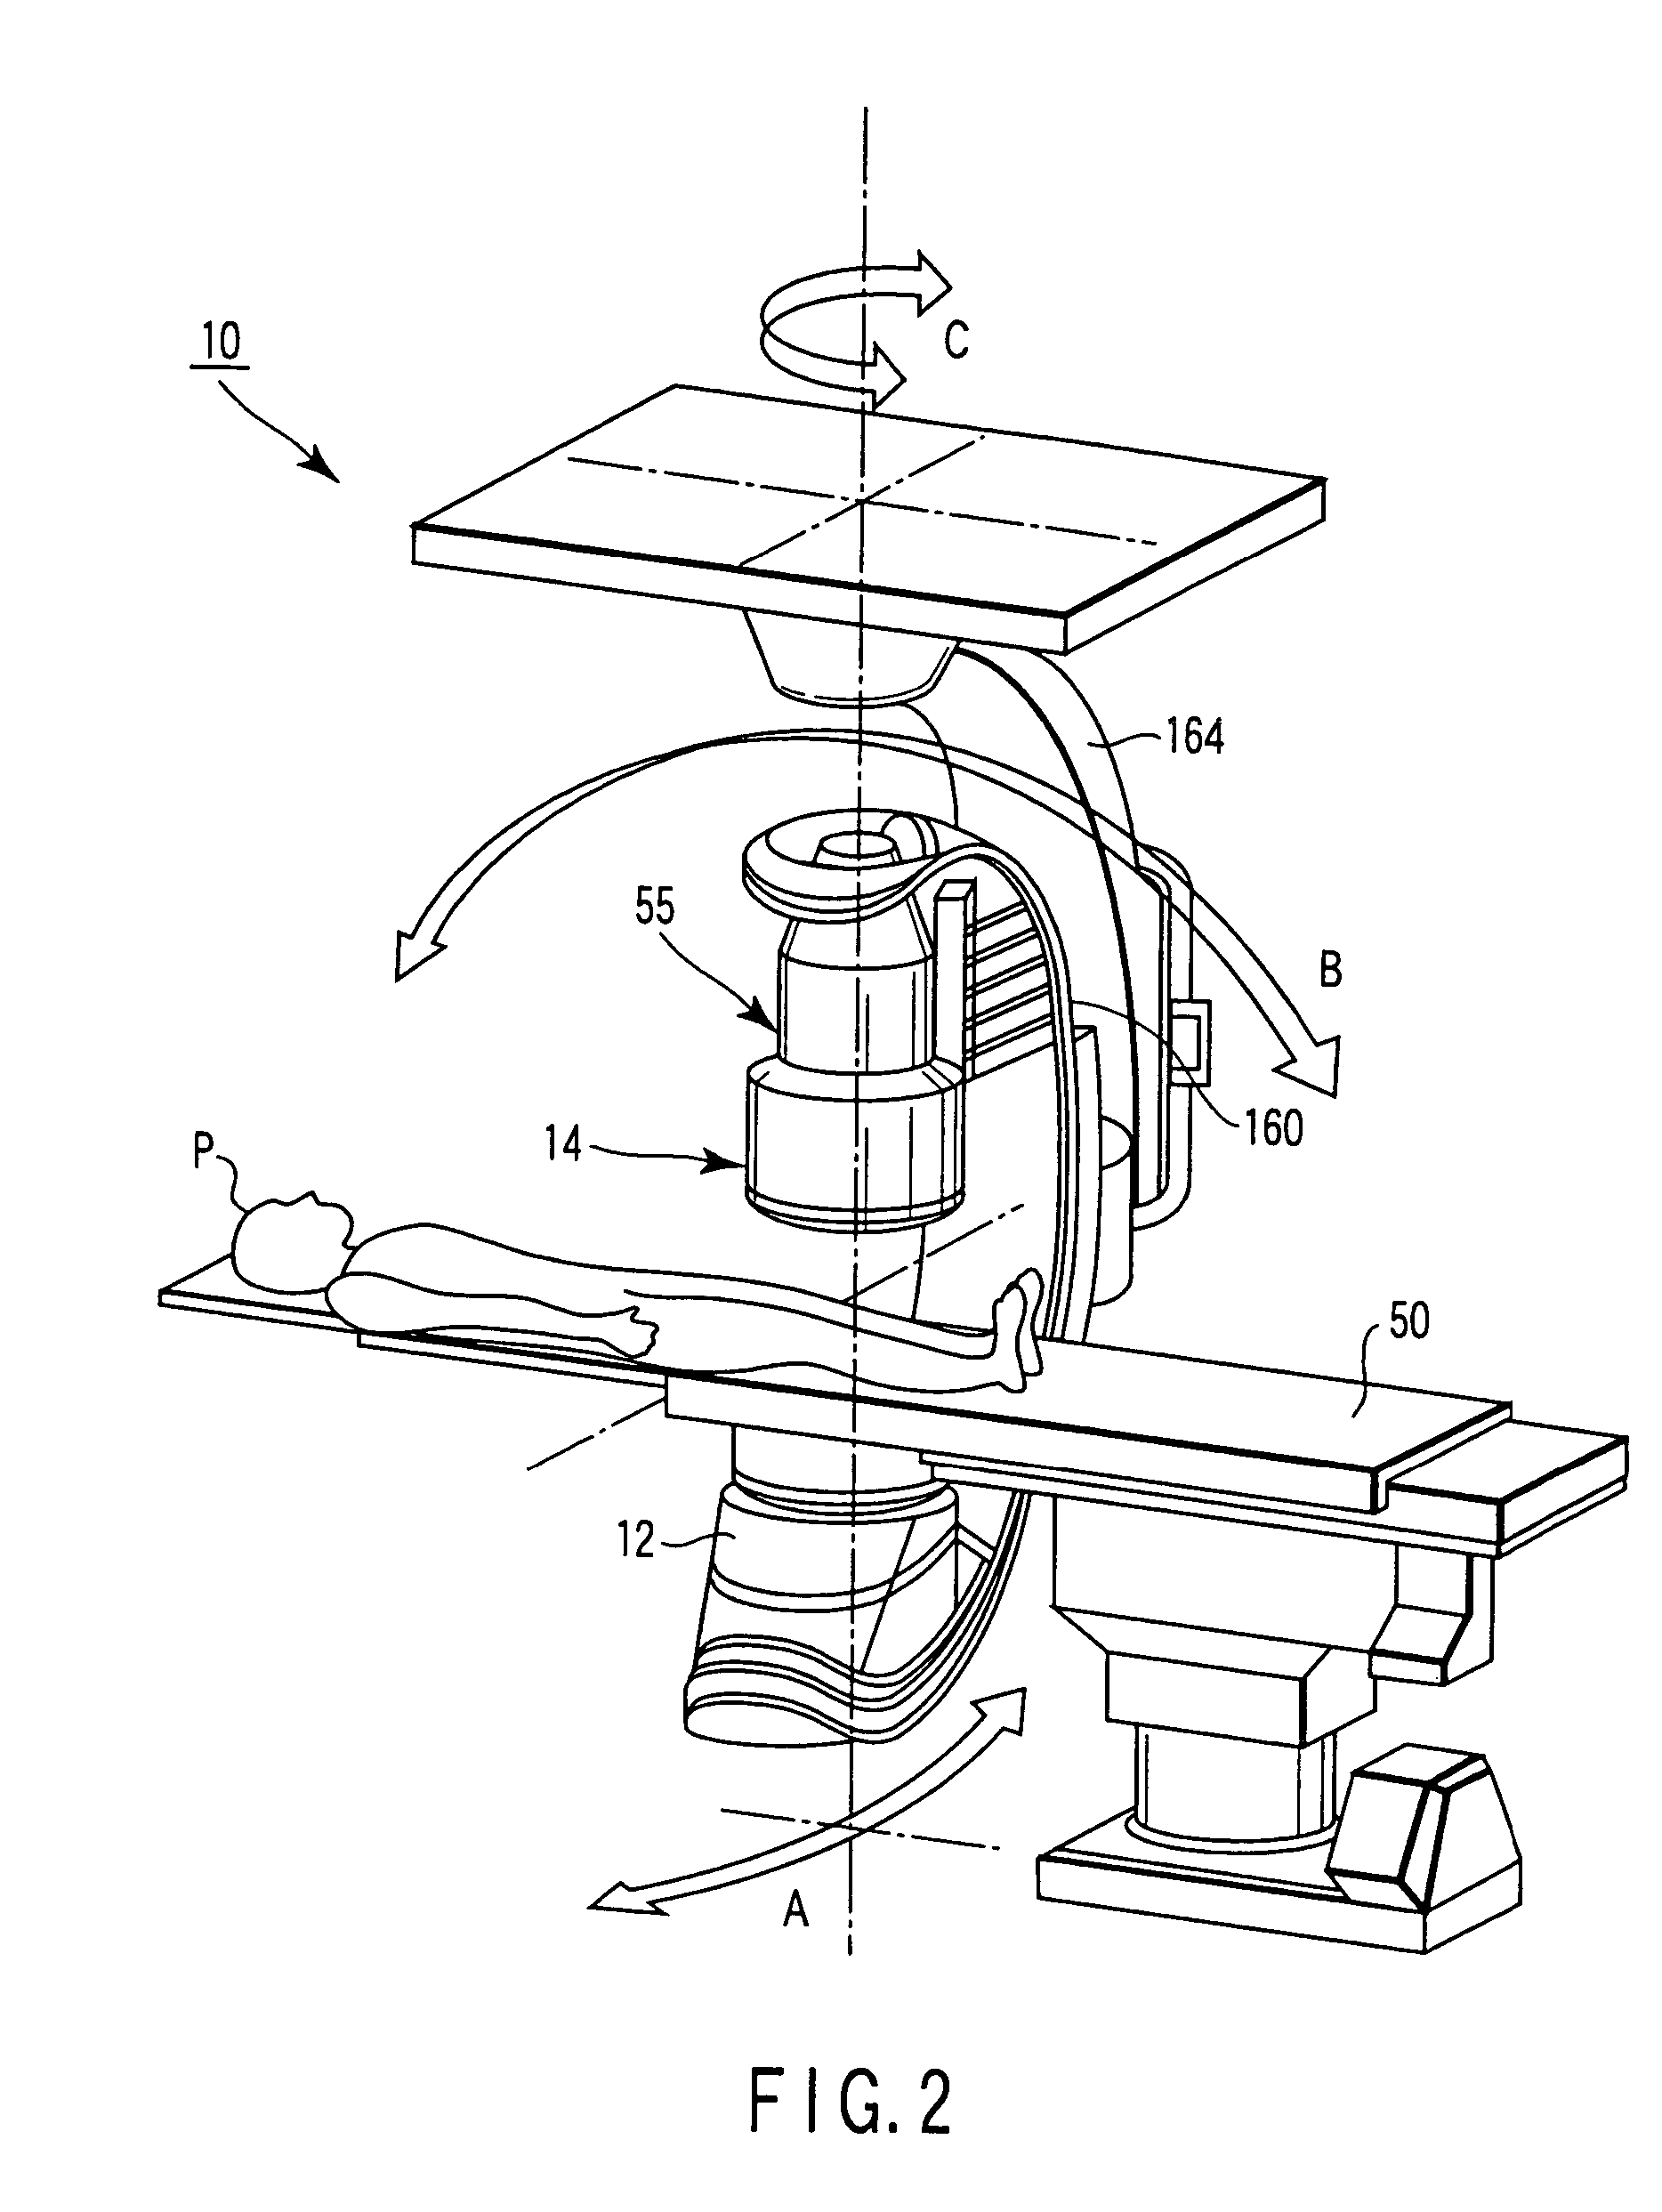 3D digital subtraction angiography image processing apparatus